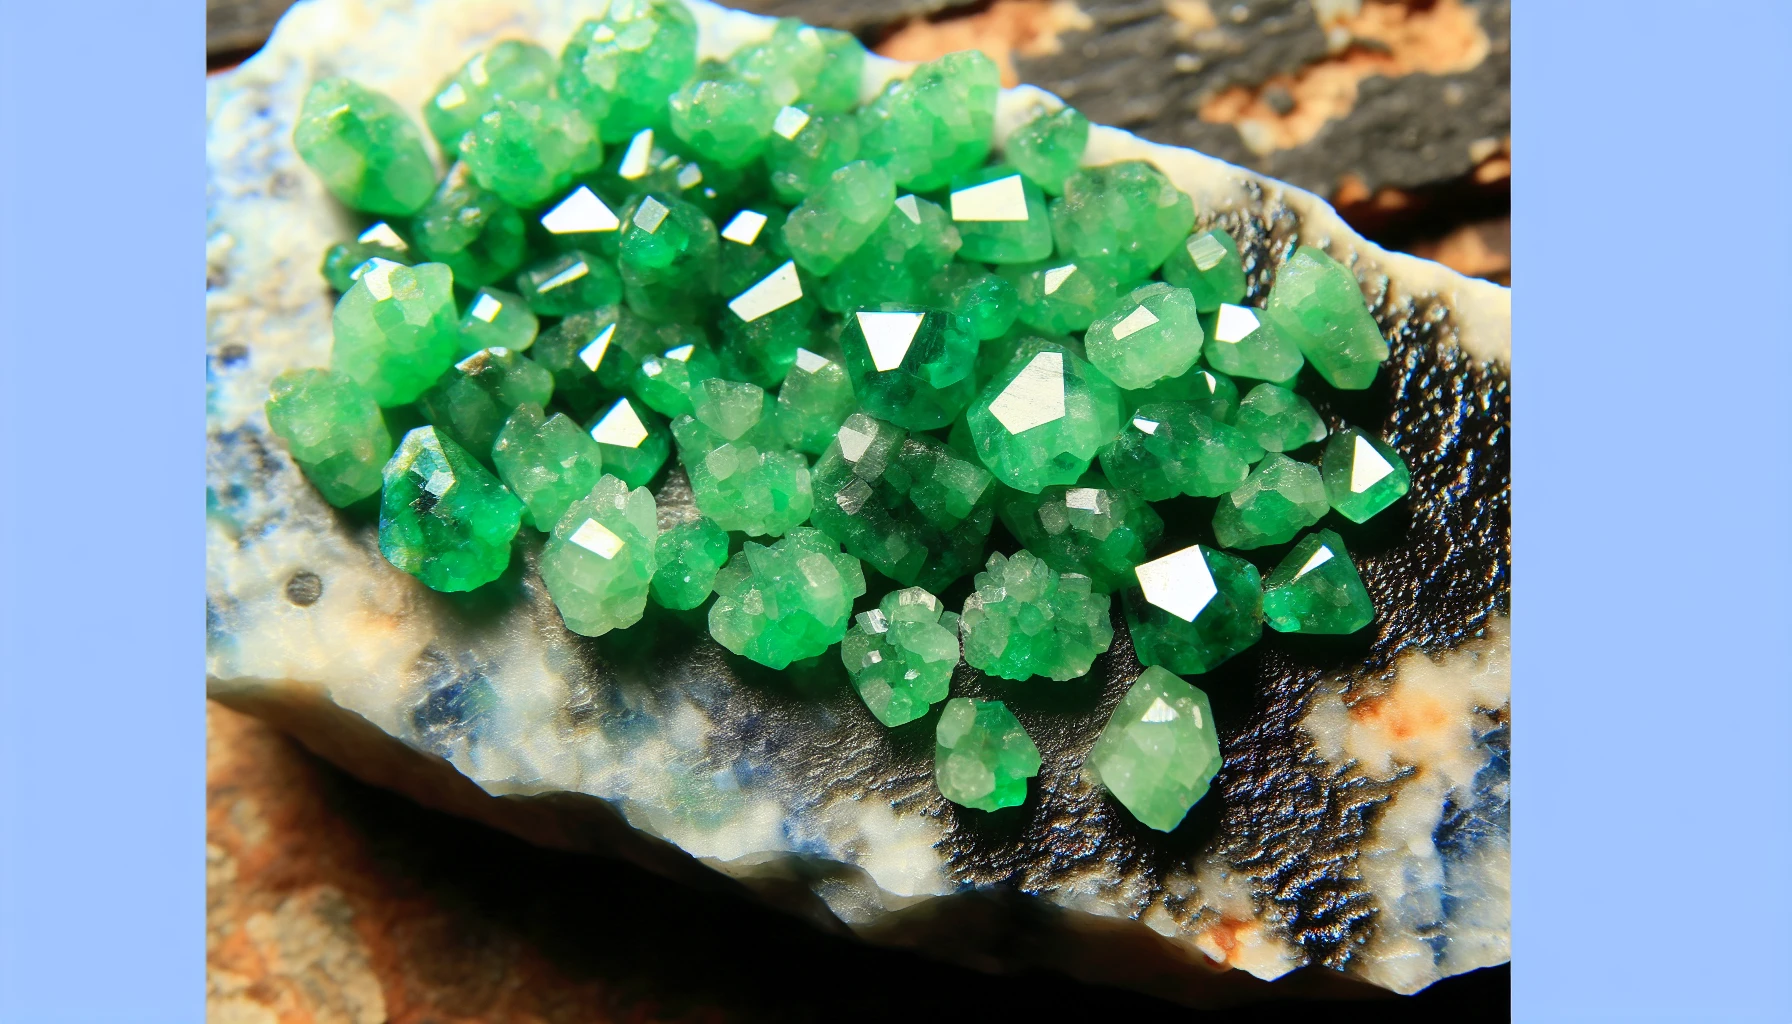 Green aventurine crystals on natural stone background